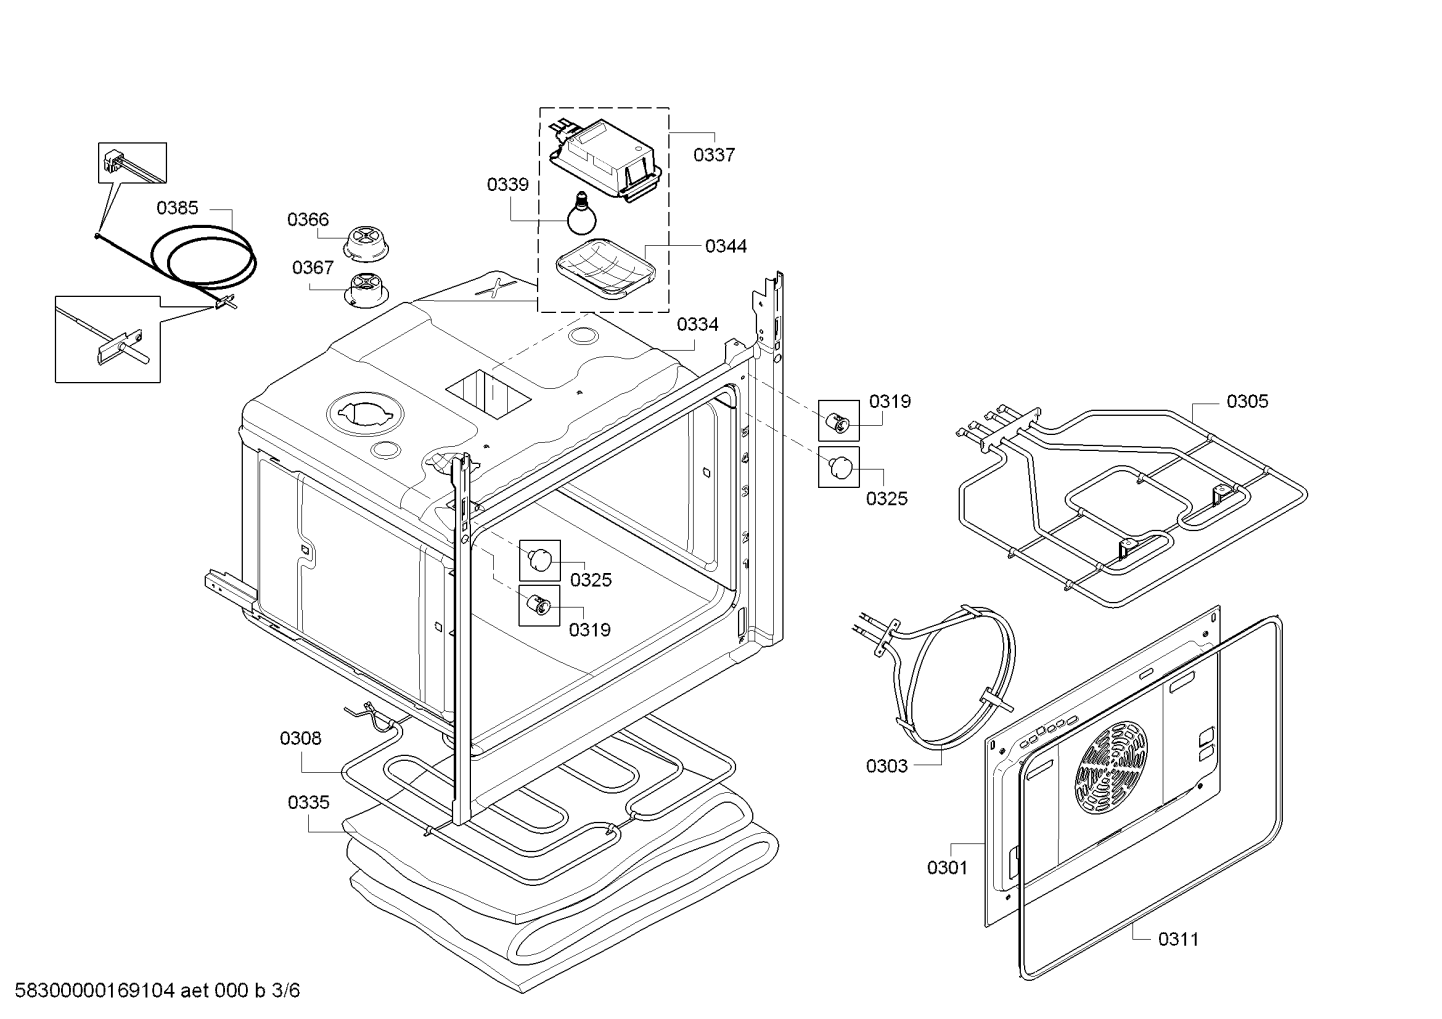 drawing_link_3_device_1824468